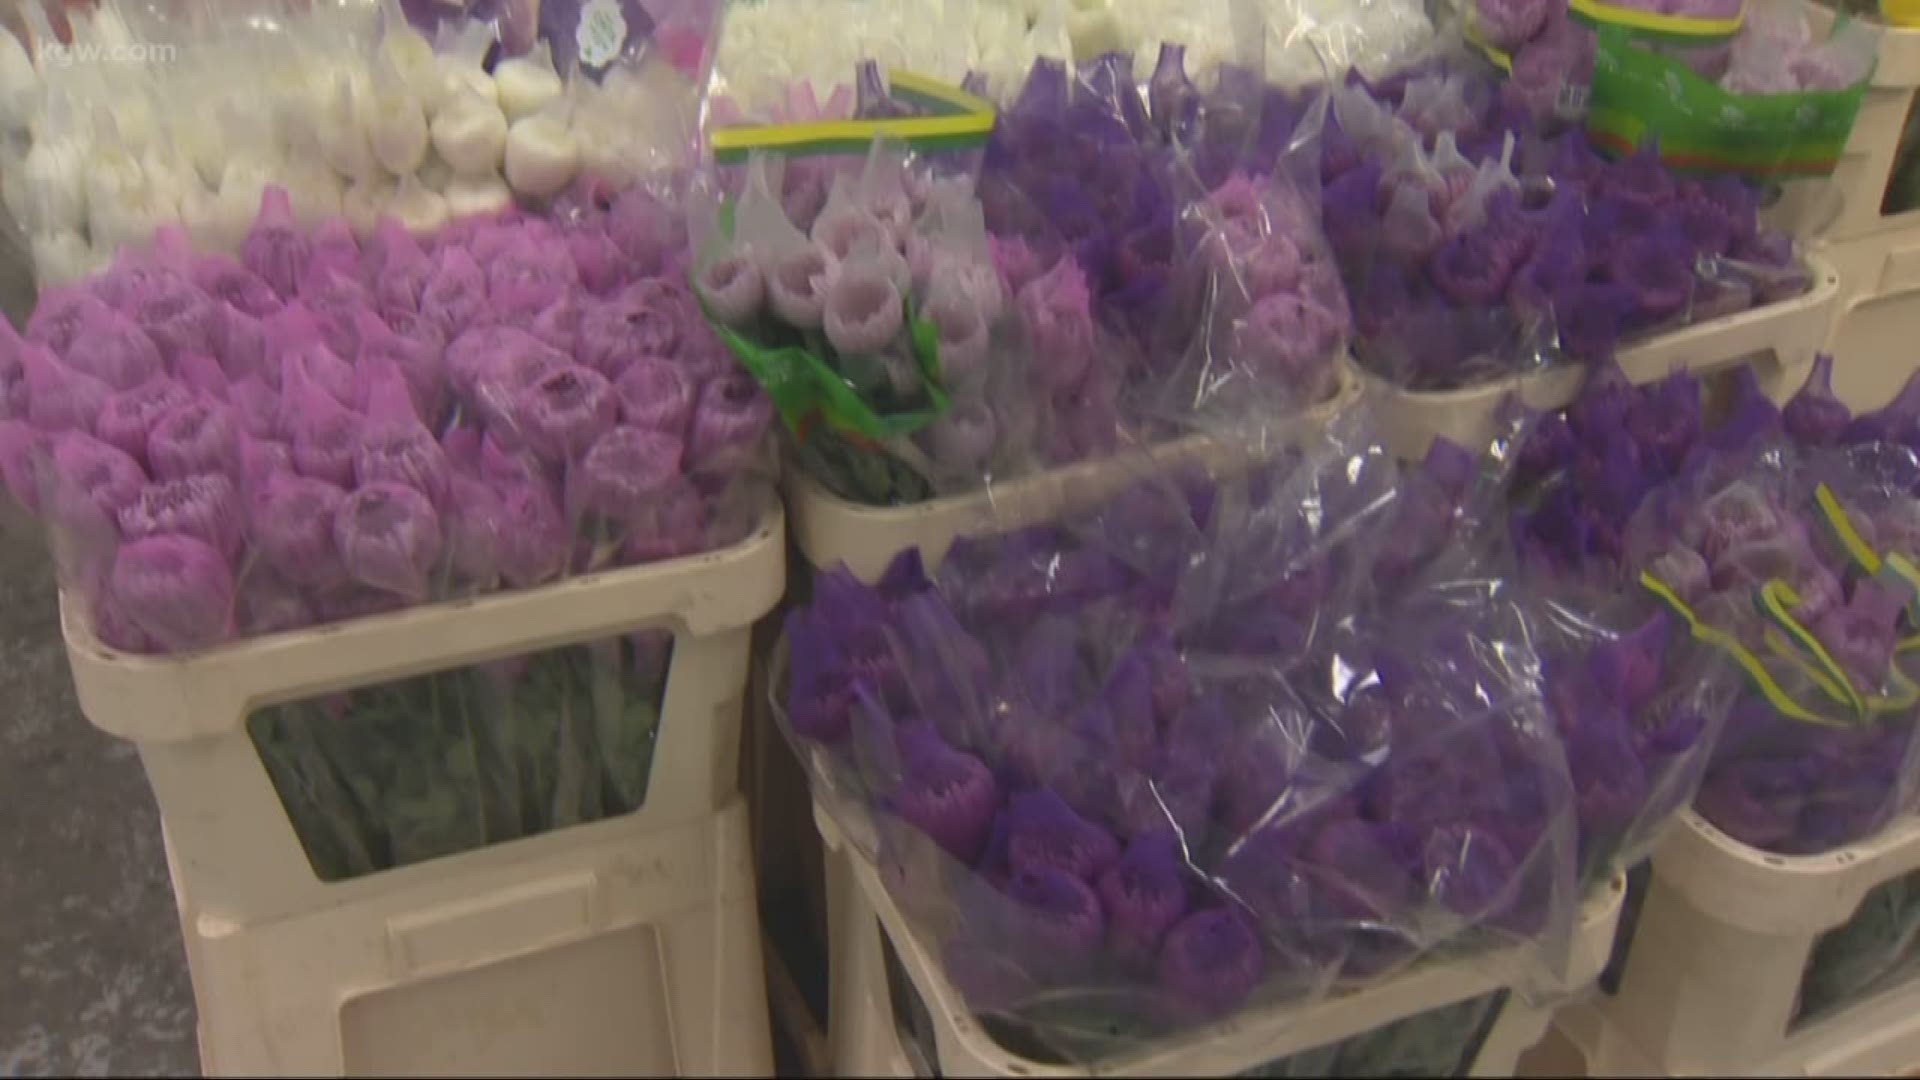 If you're planning to buy a loved one some flowers this Valentine's Day, there's a big chance they came from the Portland Flower Market. This warehouse in North Portland is where many florists come to buy their flowers. We got a behind-the-scenes look, and also some ideas for unique flowers to give this Valentine's Day - not just red roses.
https://pdxflowermarket.com/